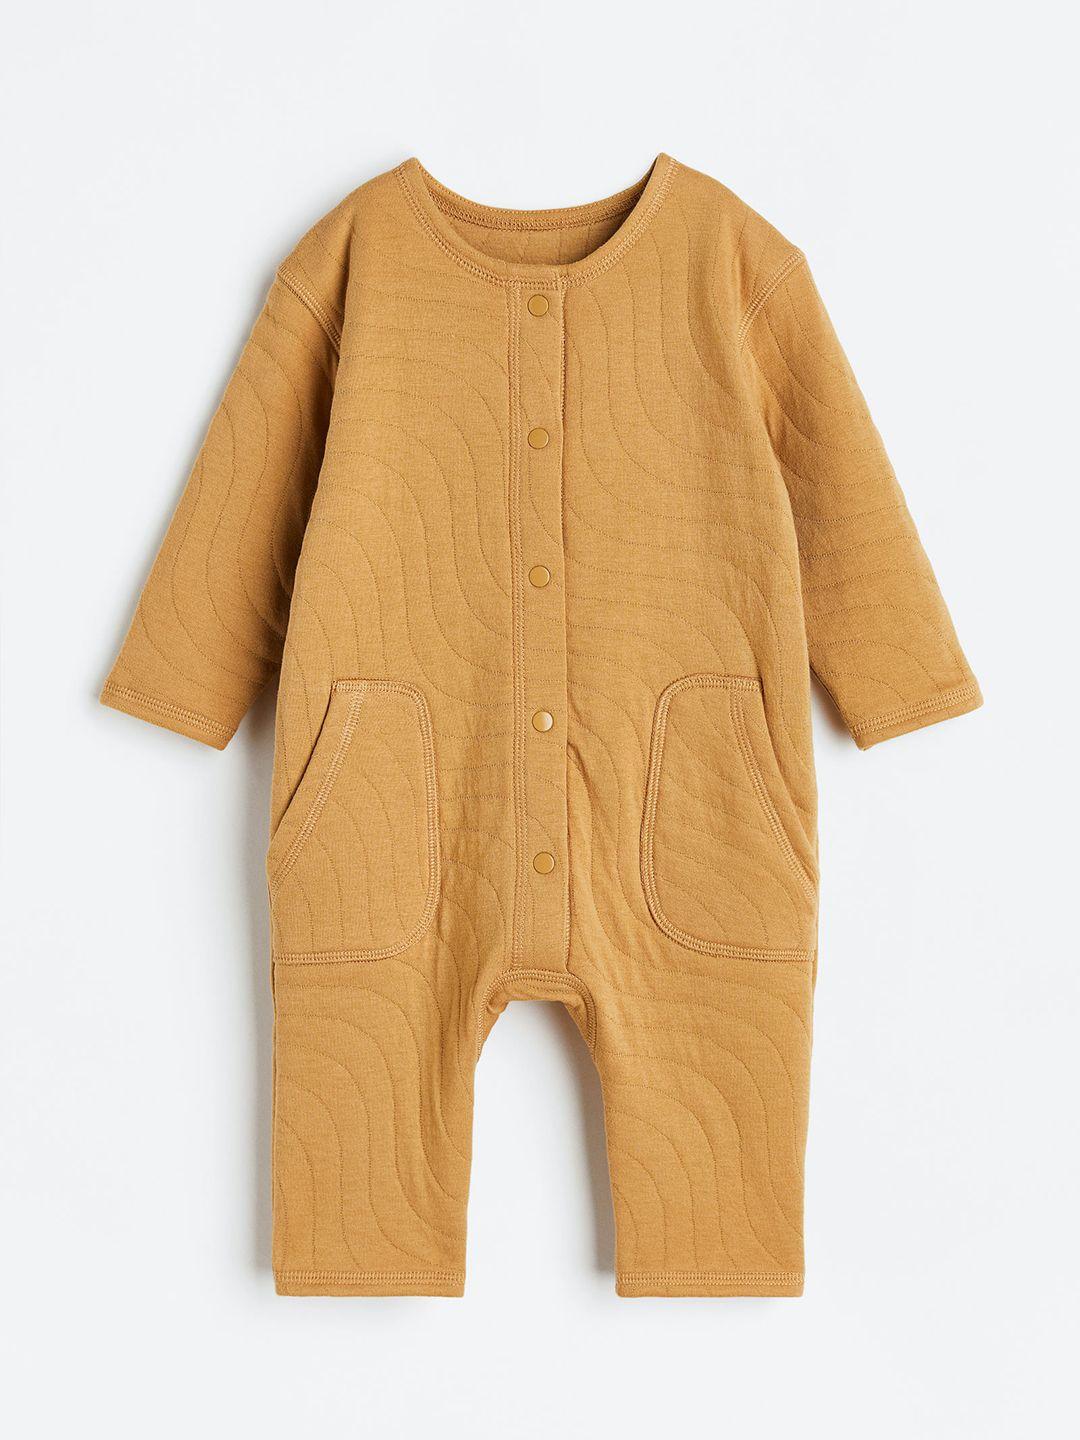 h&m-infant-girls-quilted-jersey-romper-suit